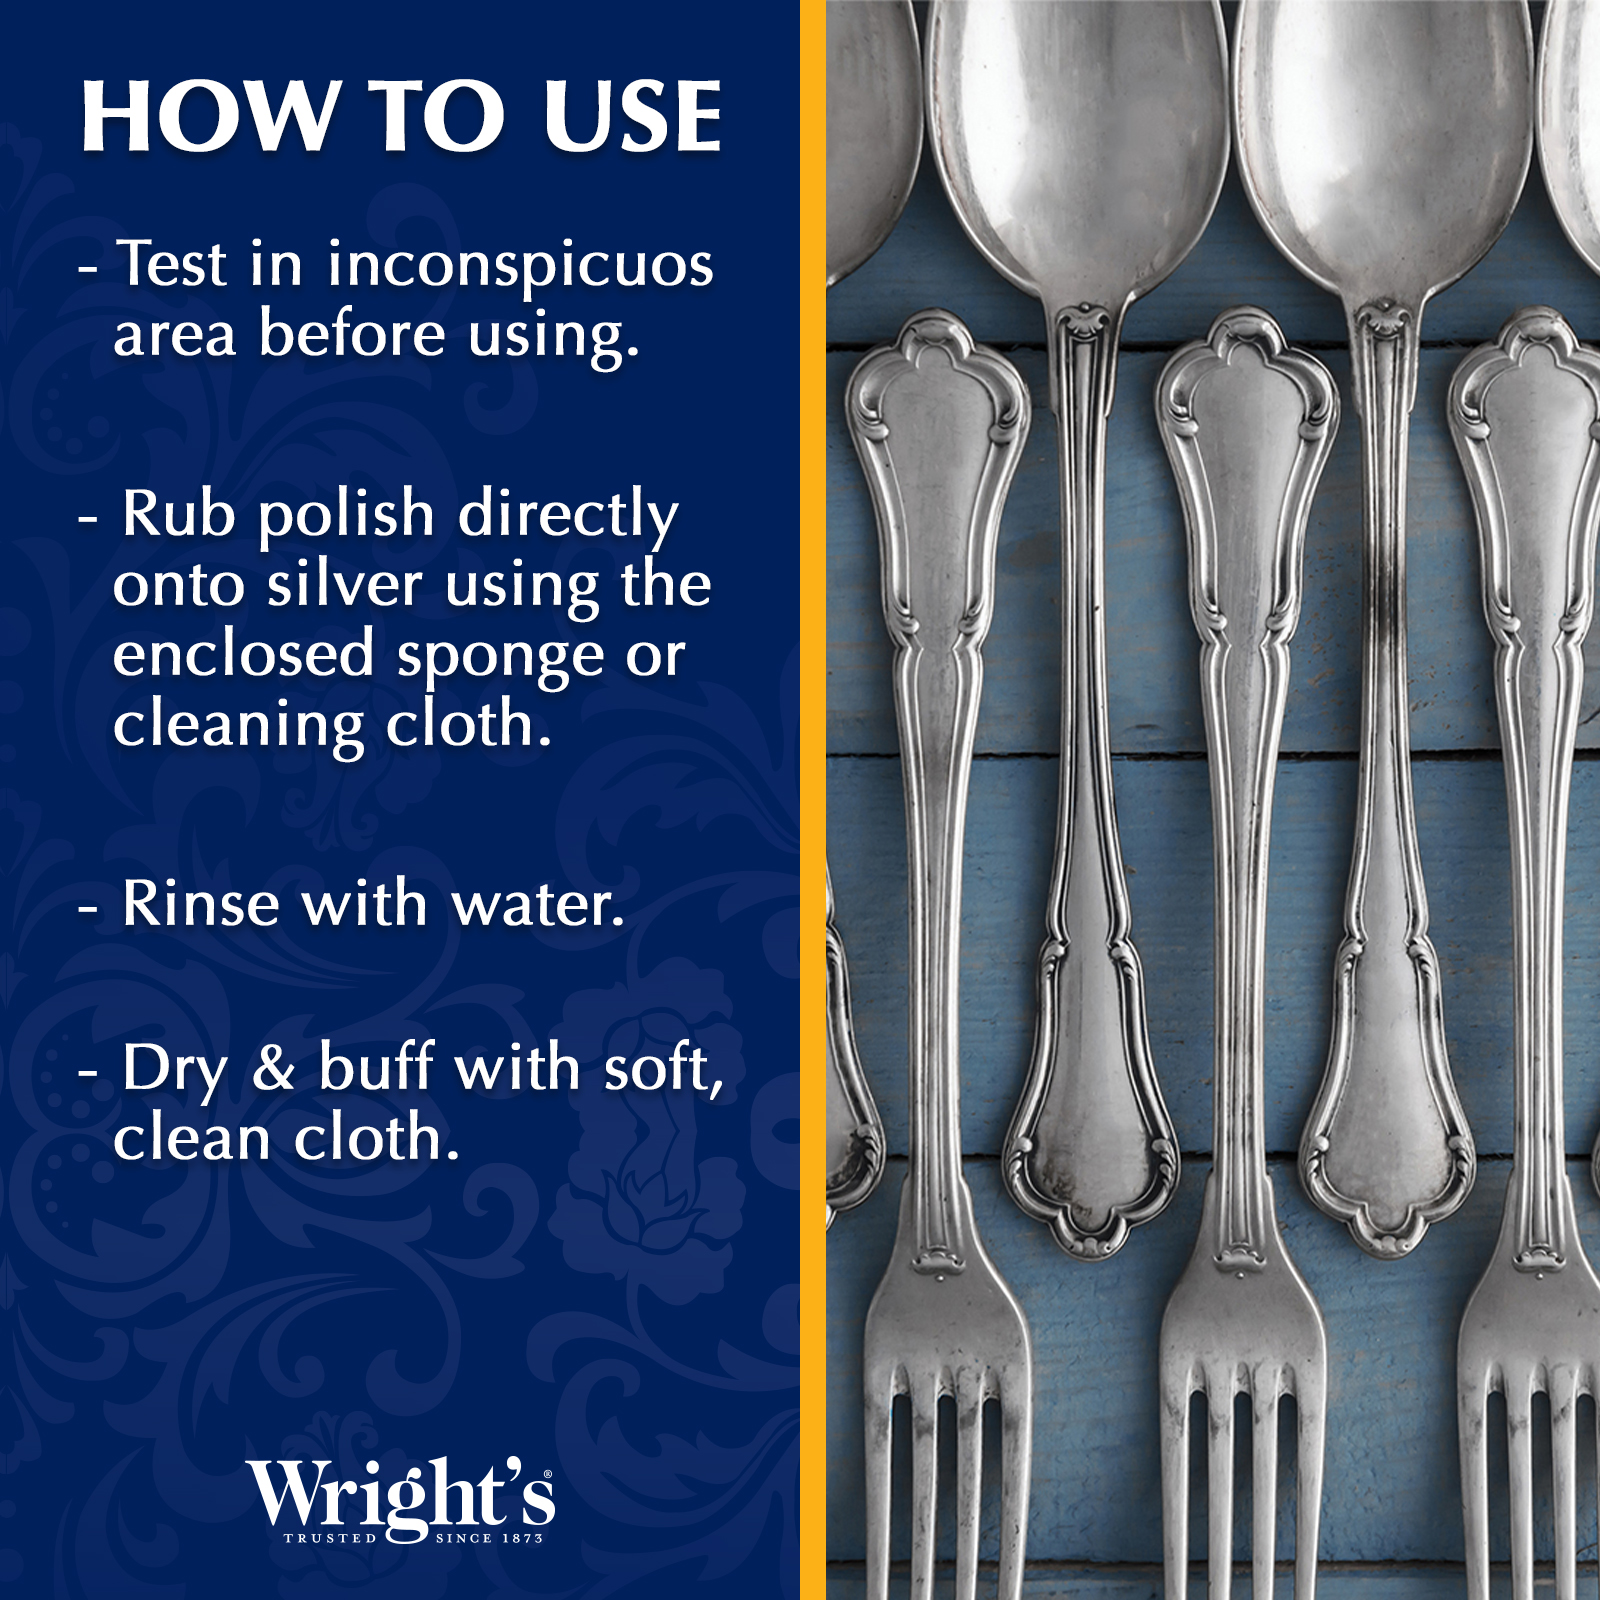 Wright's Silver Polishing Cream, 3-in-1, All-Purpose, 8 Oz, with Microfiber Cloth Included - image 5 of 7